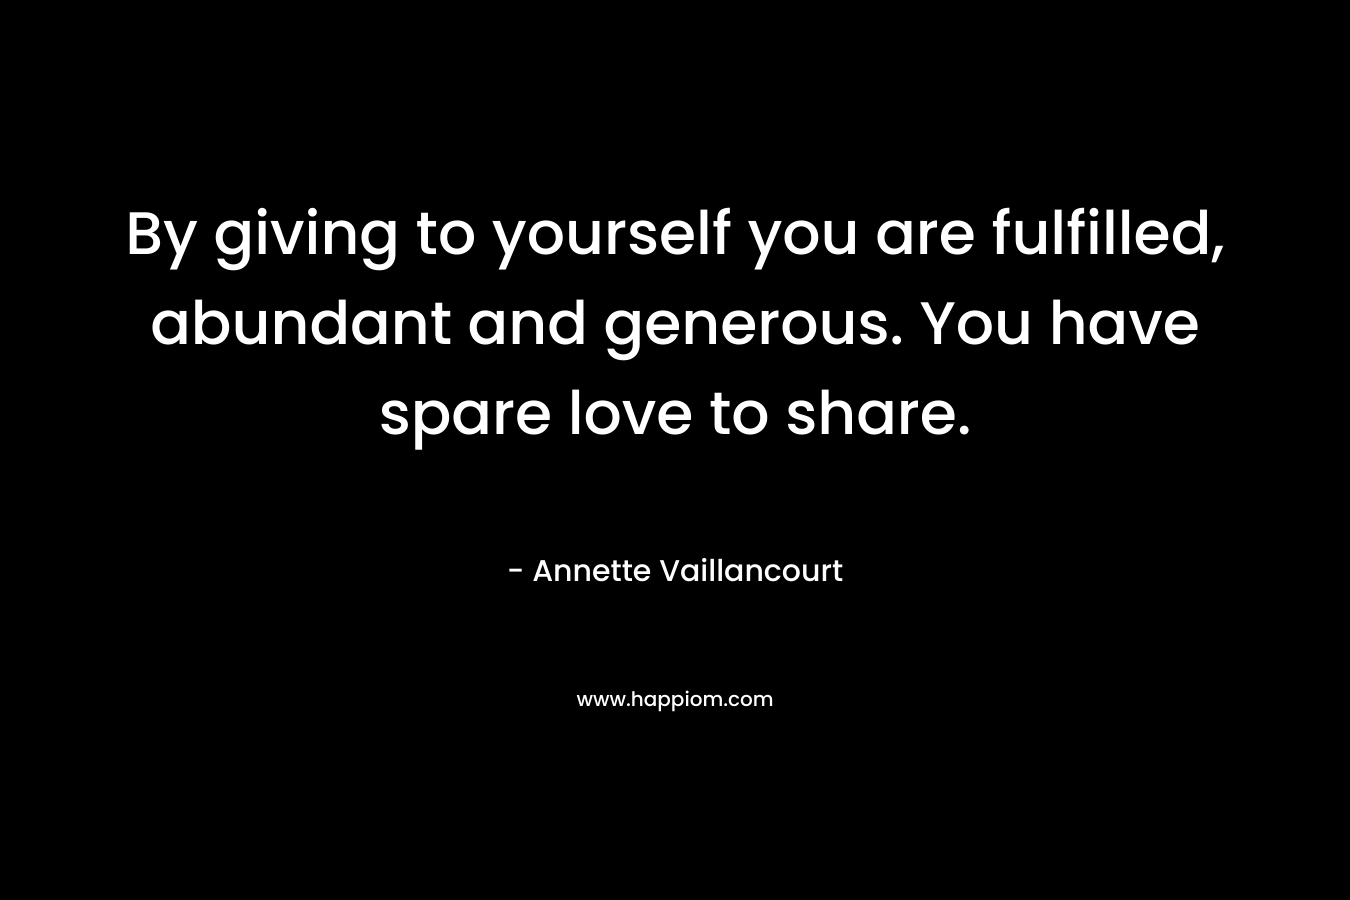 By giving to yourself you are fulfilled, abundant and generous. You have spare love to share. – Annette Vaillancourt